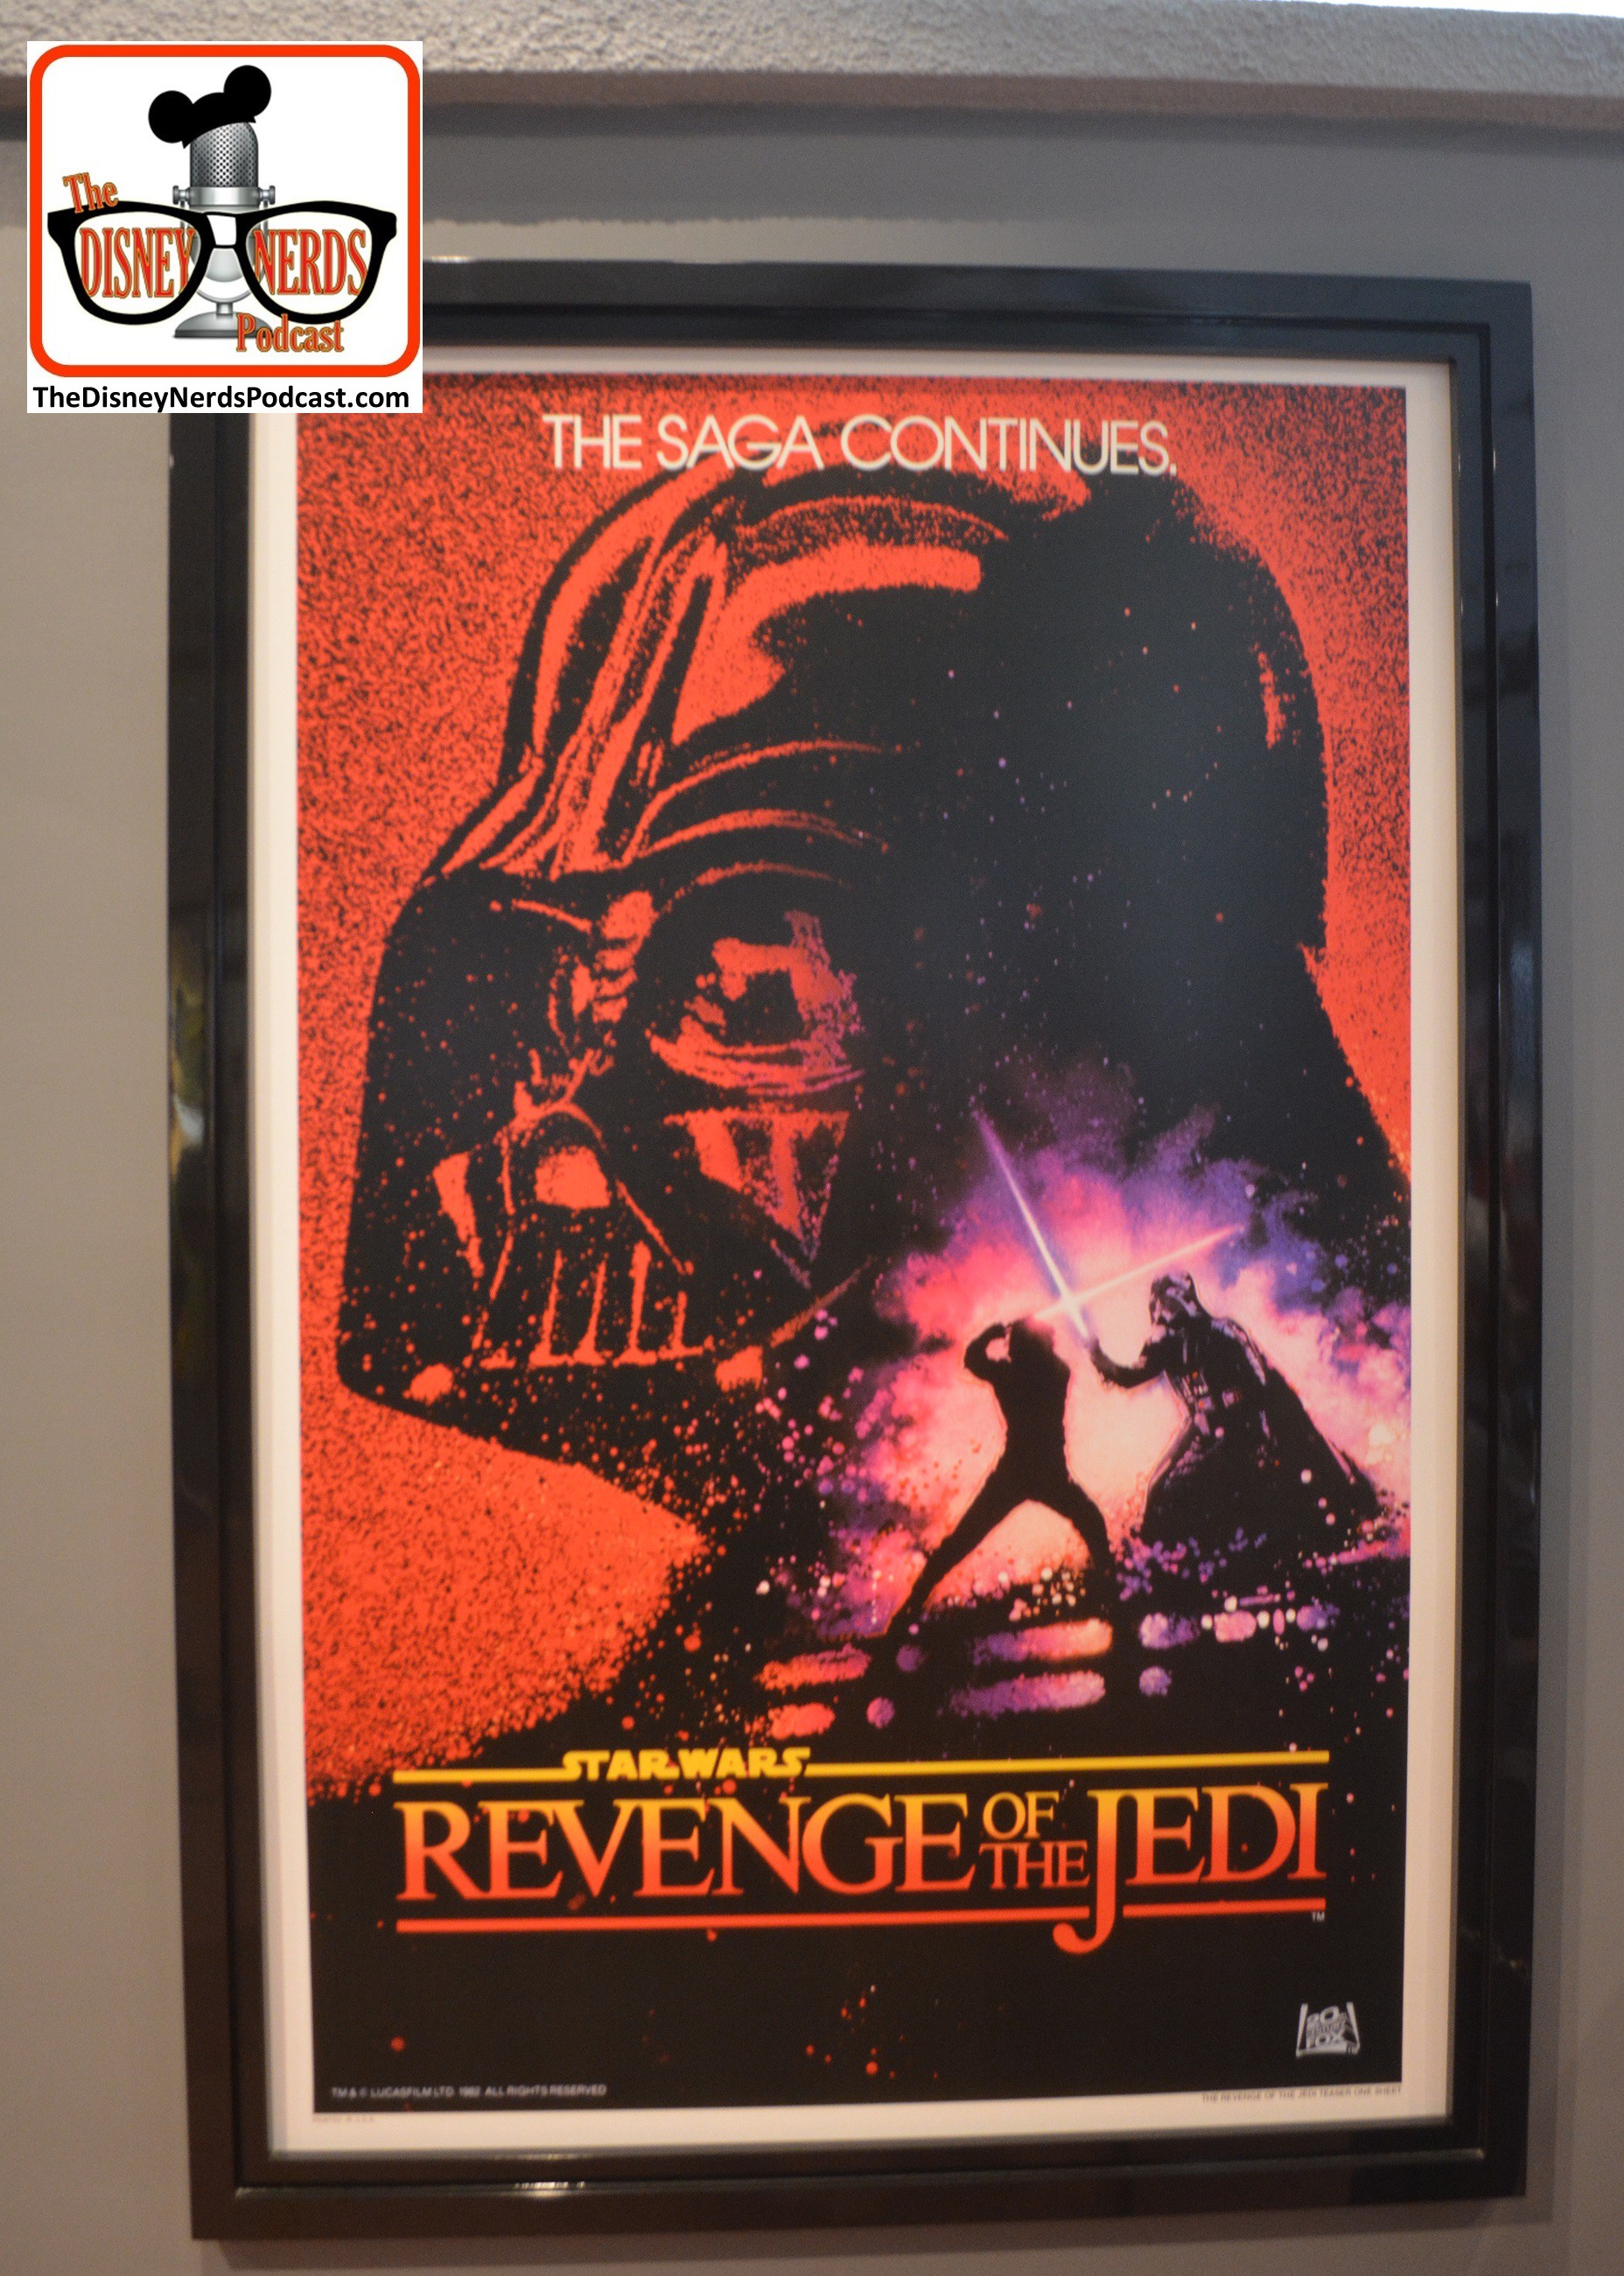 2015-12 - Hollywood Studios -Star Wars Posters cover the queue - the posters cover everything in the star wars universe. - and the little known... "Revenge of the Jedi"?